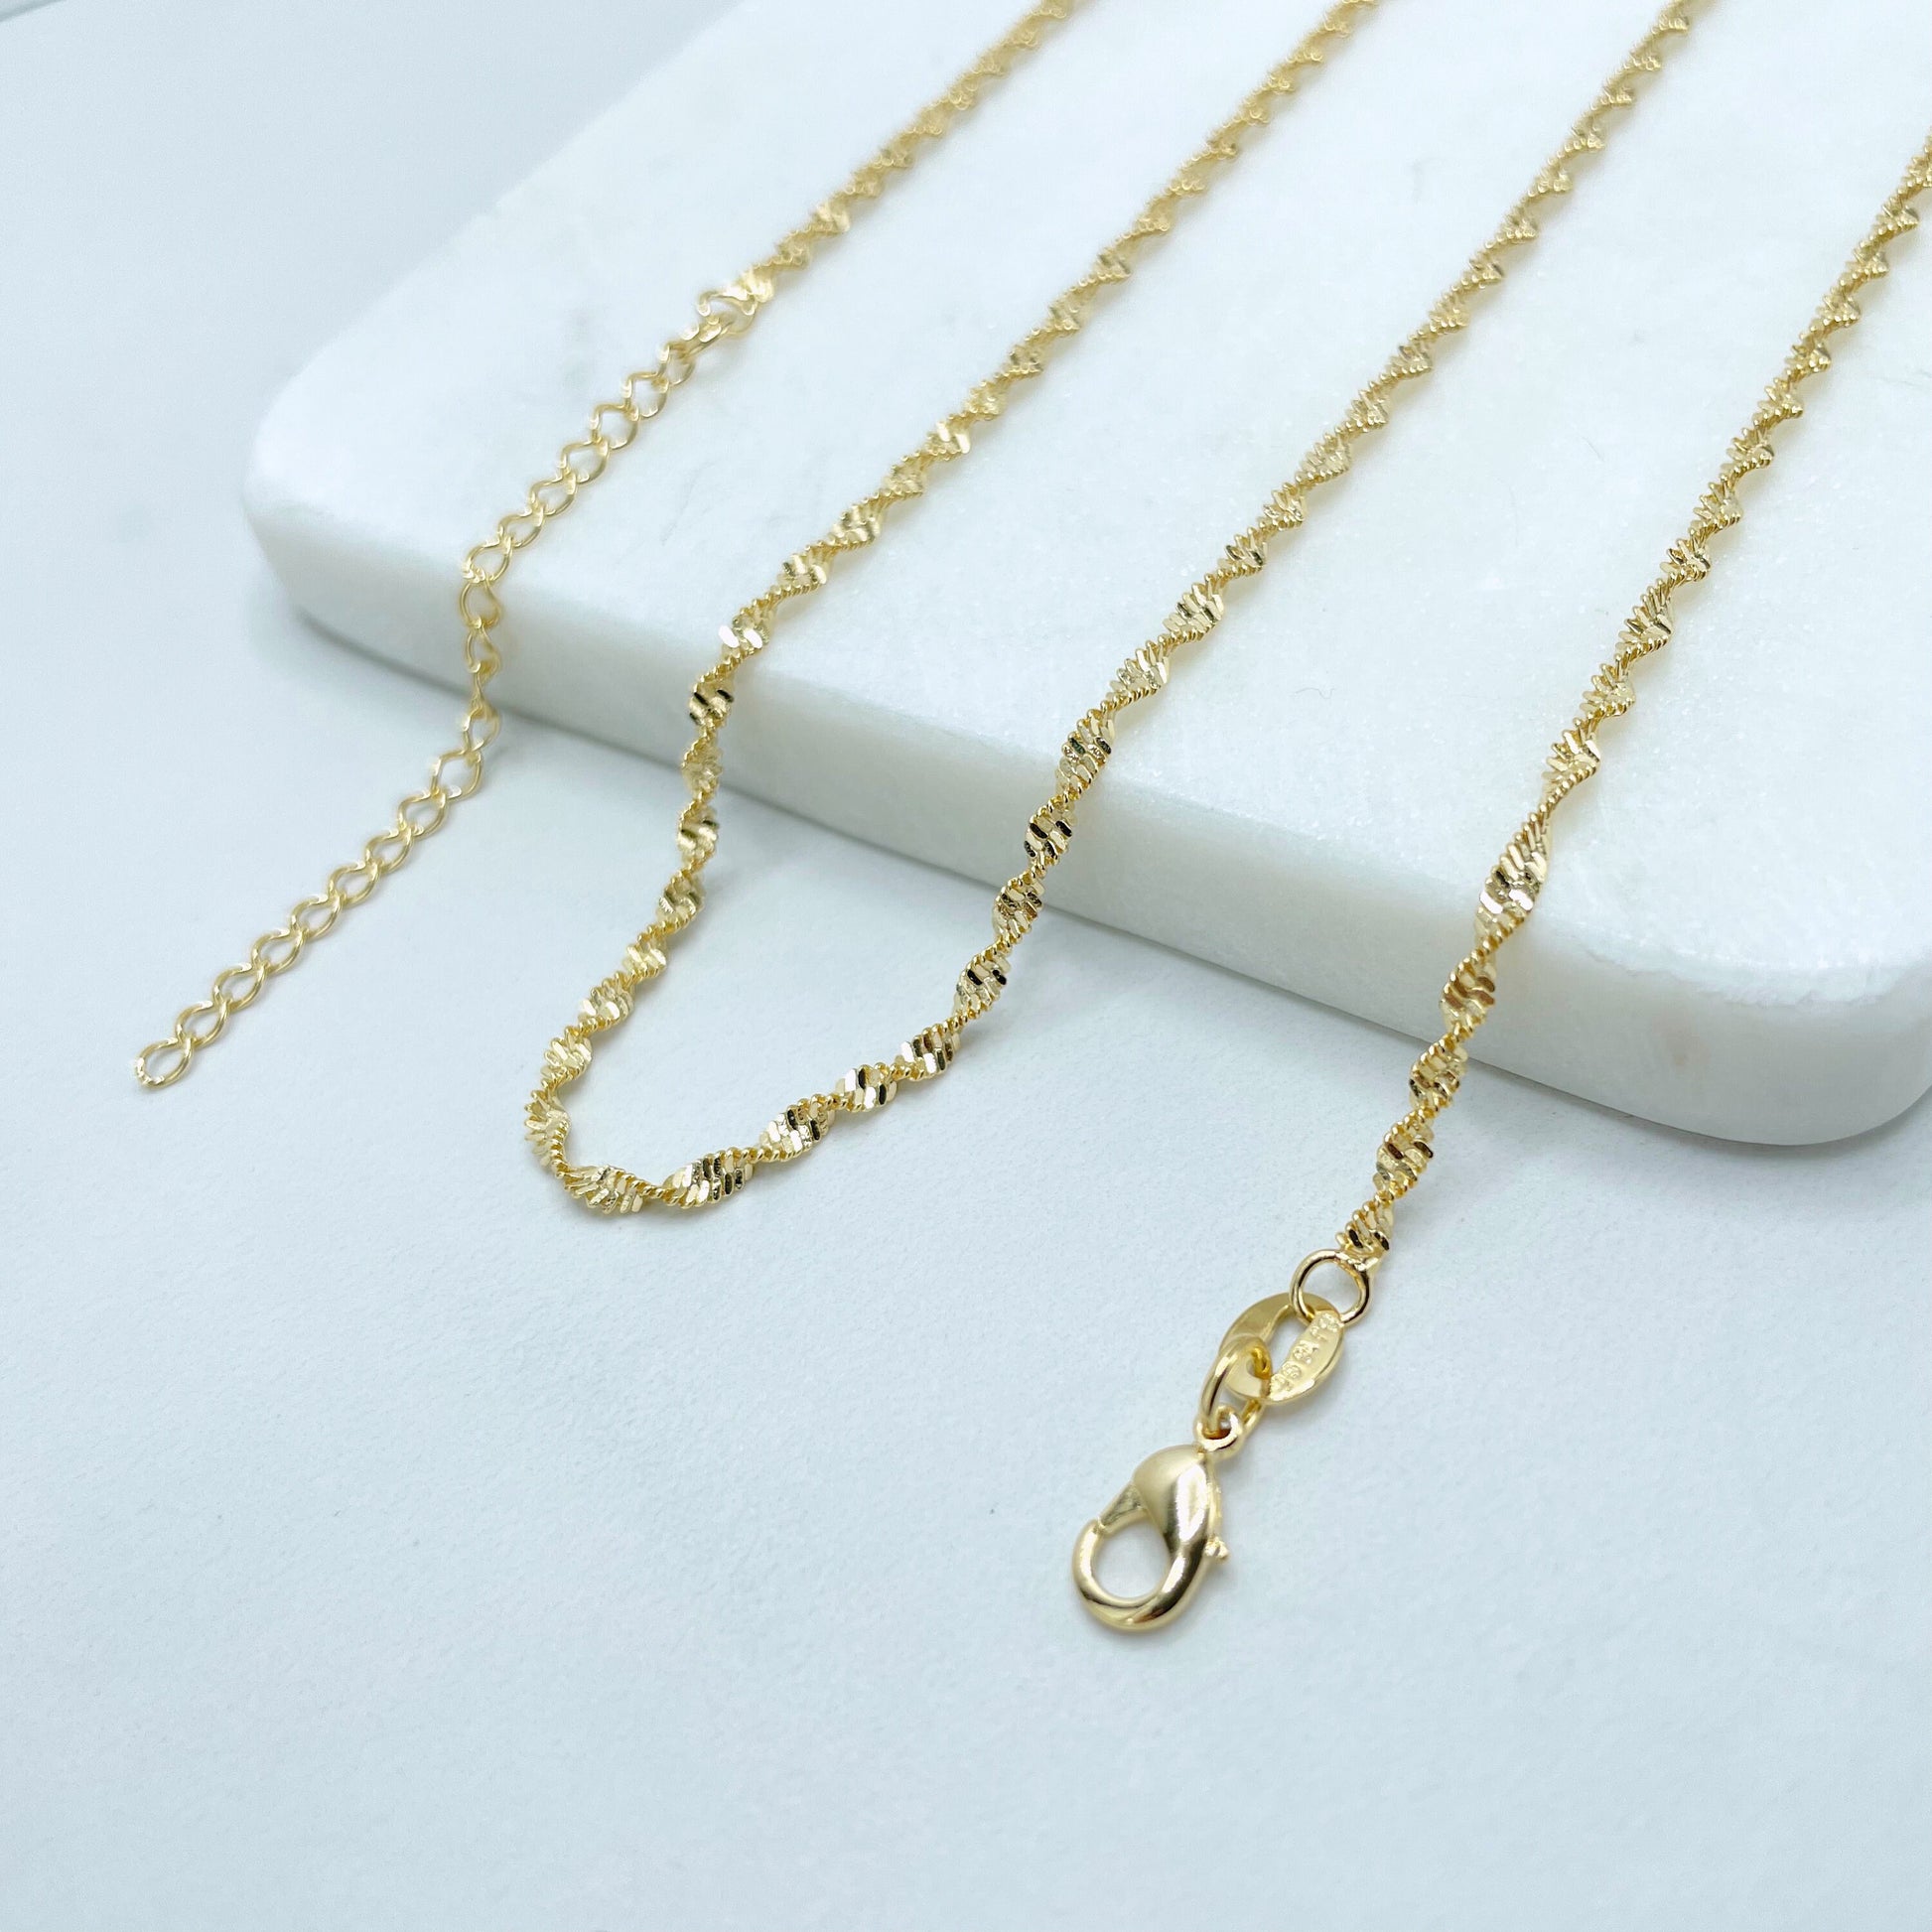 18k Gold Filled Singapore Link Chain 2mm, length 16 inches or 18 inches, 18 inches, 20 inches Chain Wholesale Jewelry Making Supplies